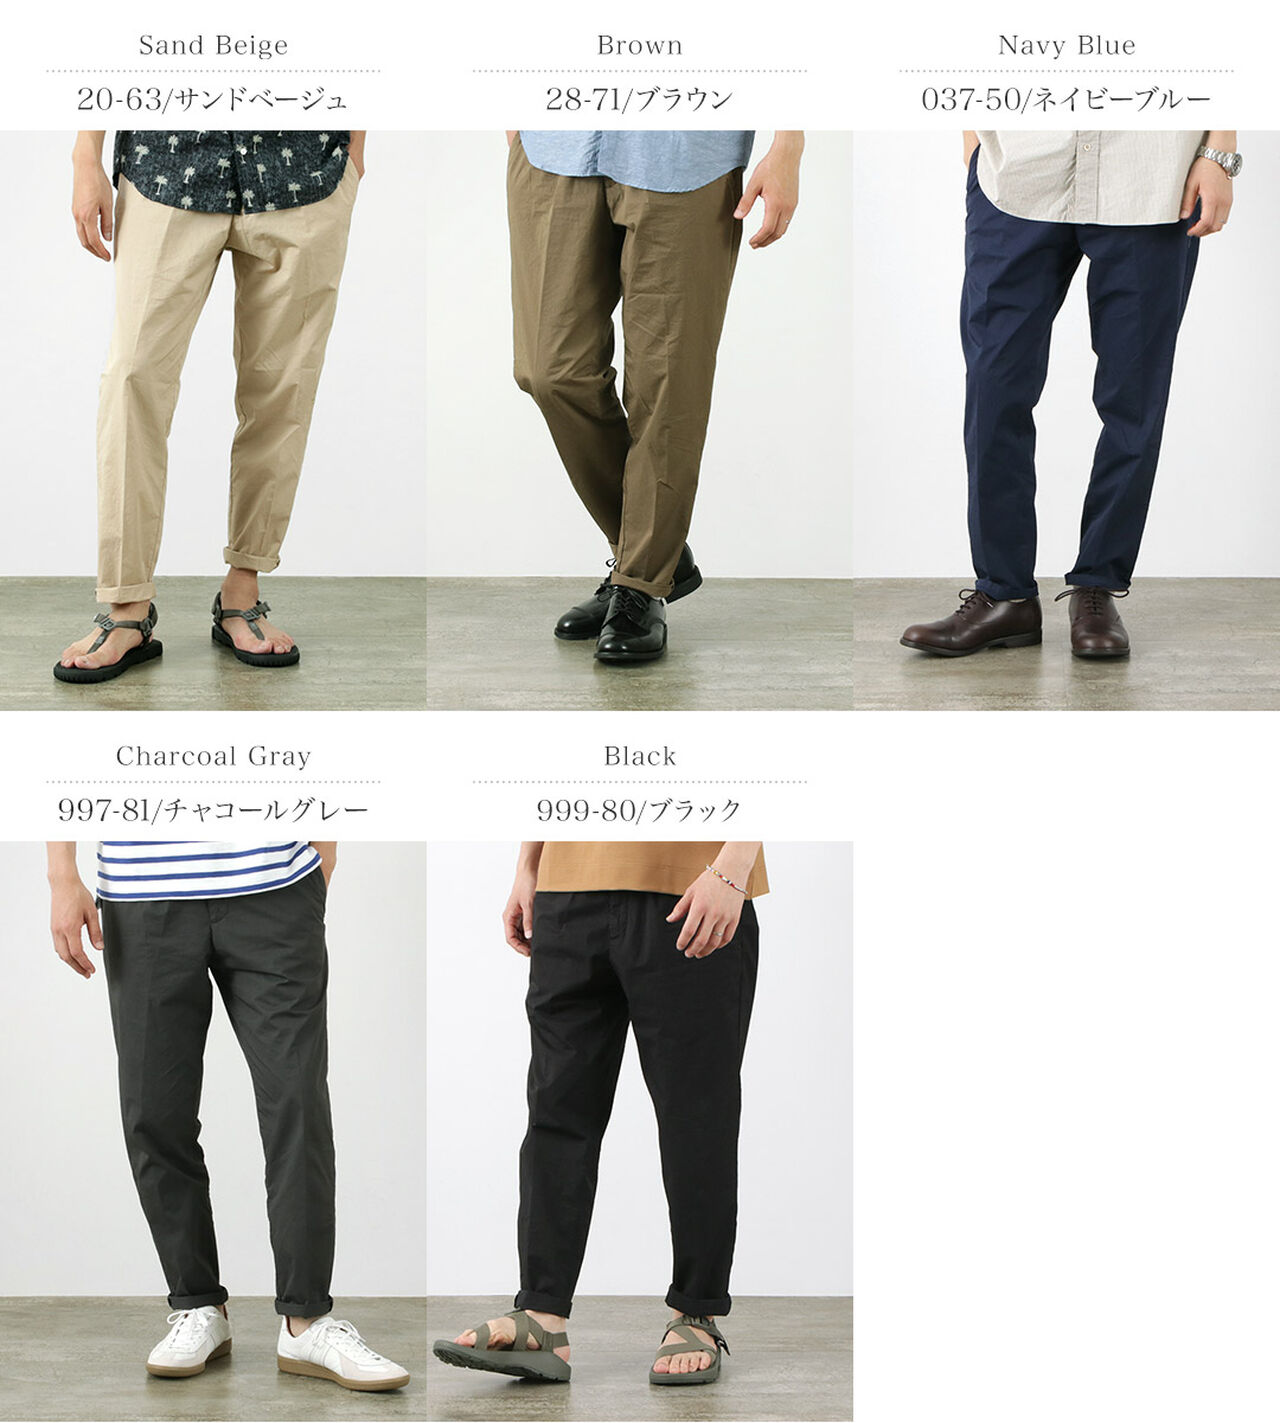 Olive pants perfection  Spring outfits casual, Casual khaki pants